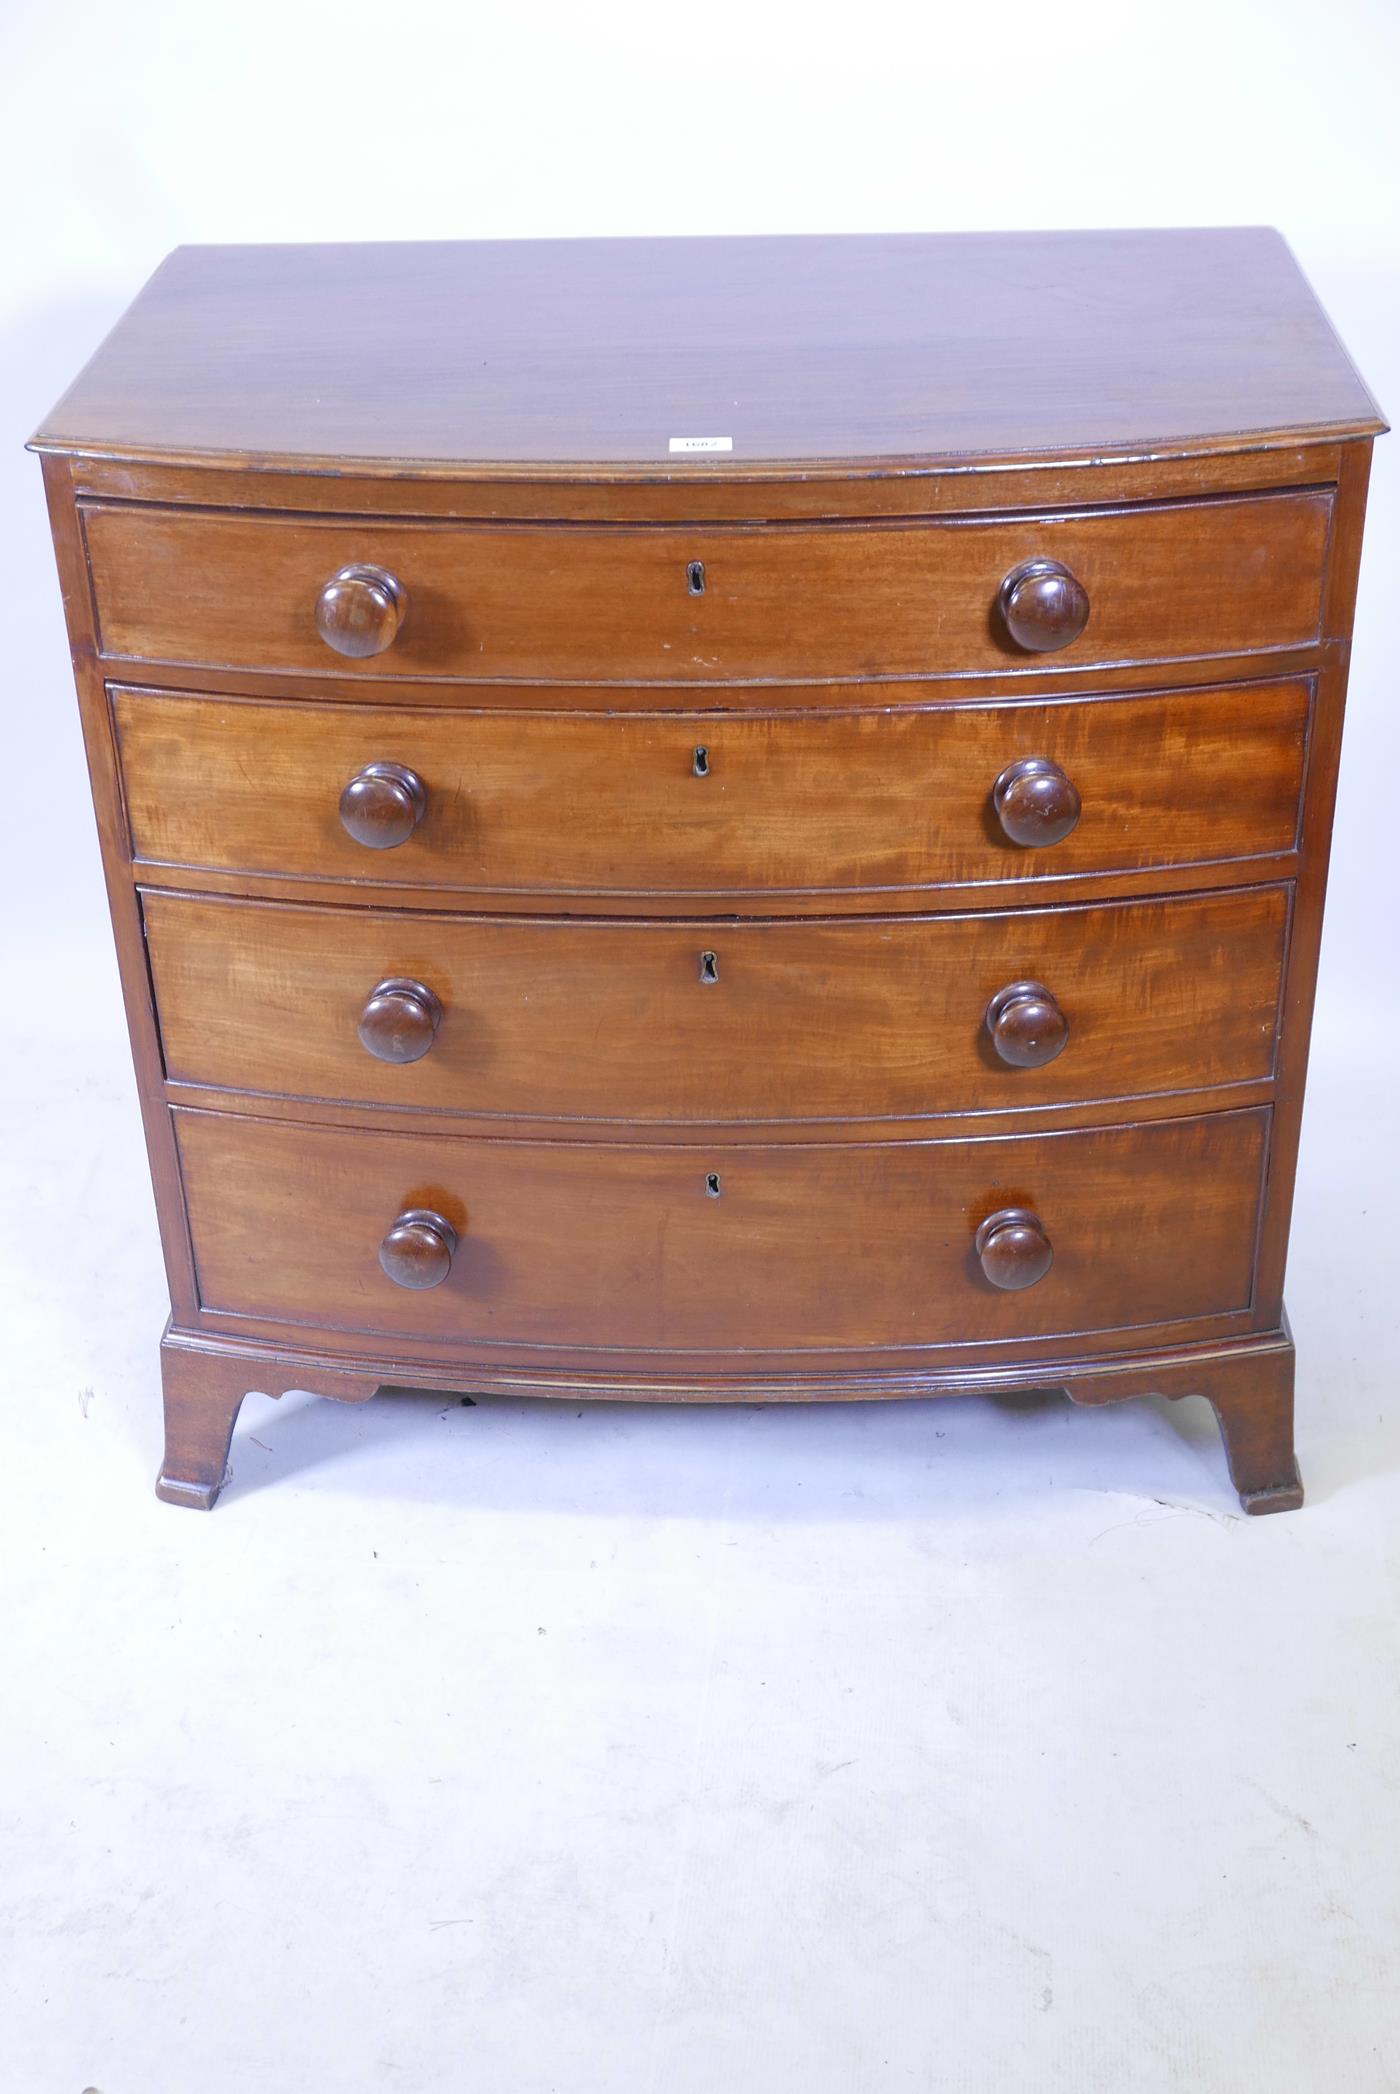 A C19th mahogany bowfront chest of four long drawers, raised on swept supports, reduced, 34" x 21" x - Image 2 of 3